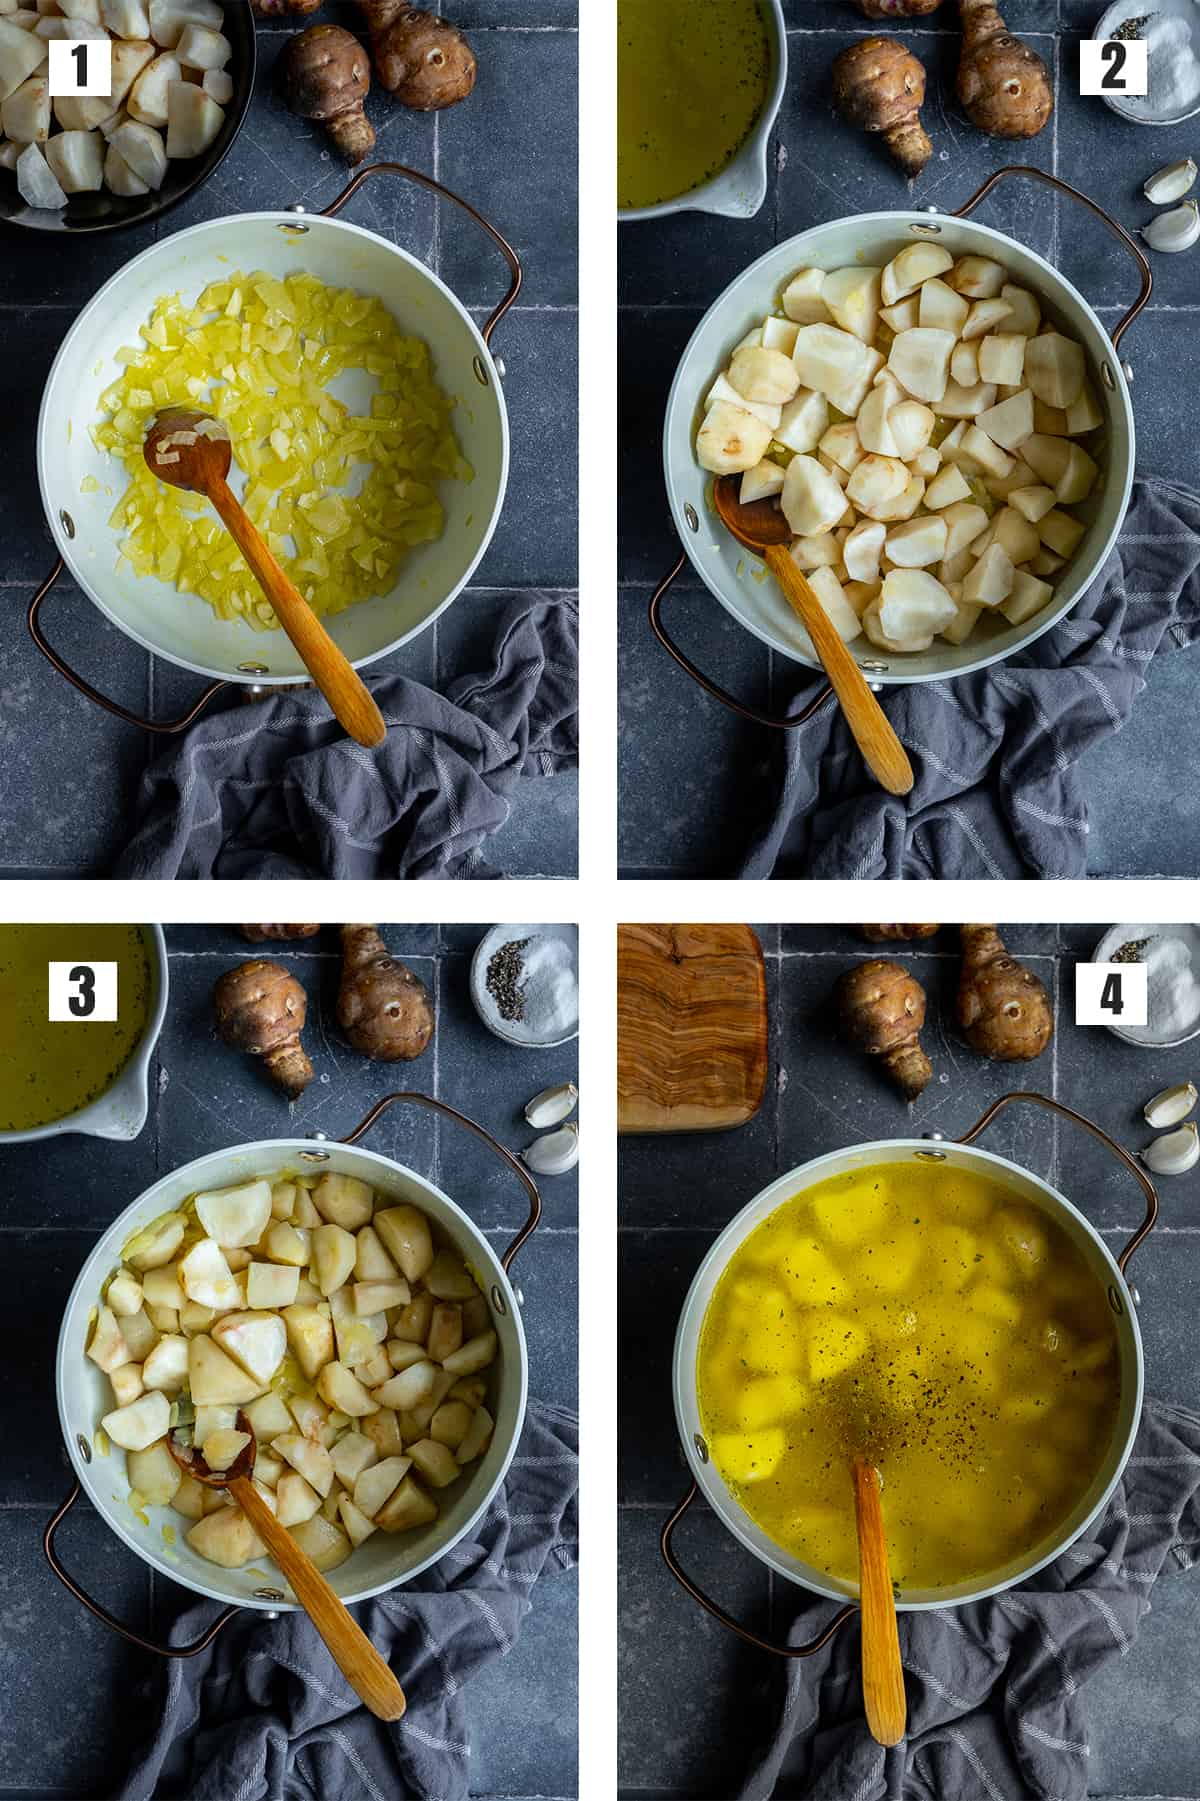 A collage of four pictures showing the steps of making Jerusalem artichoke soup.